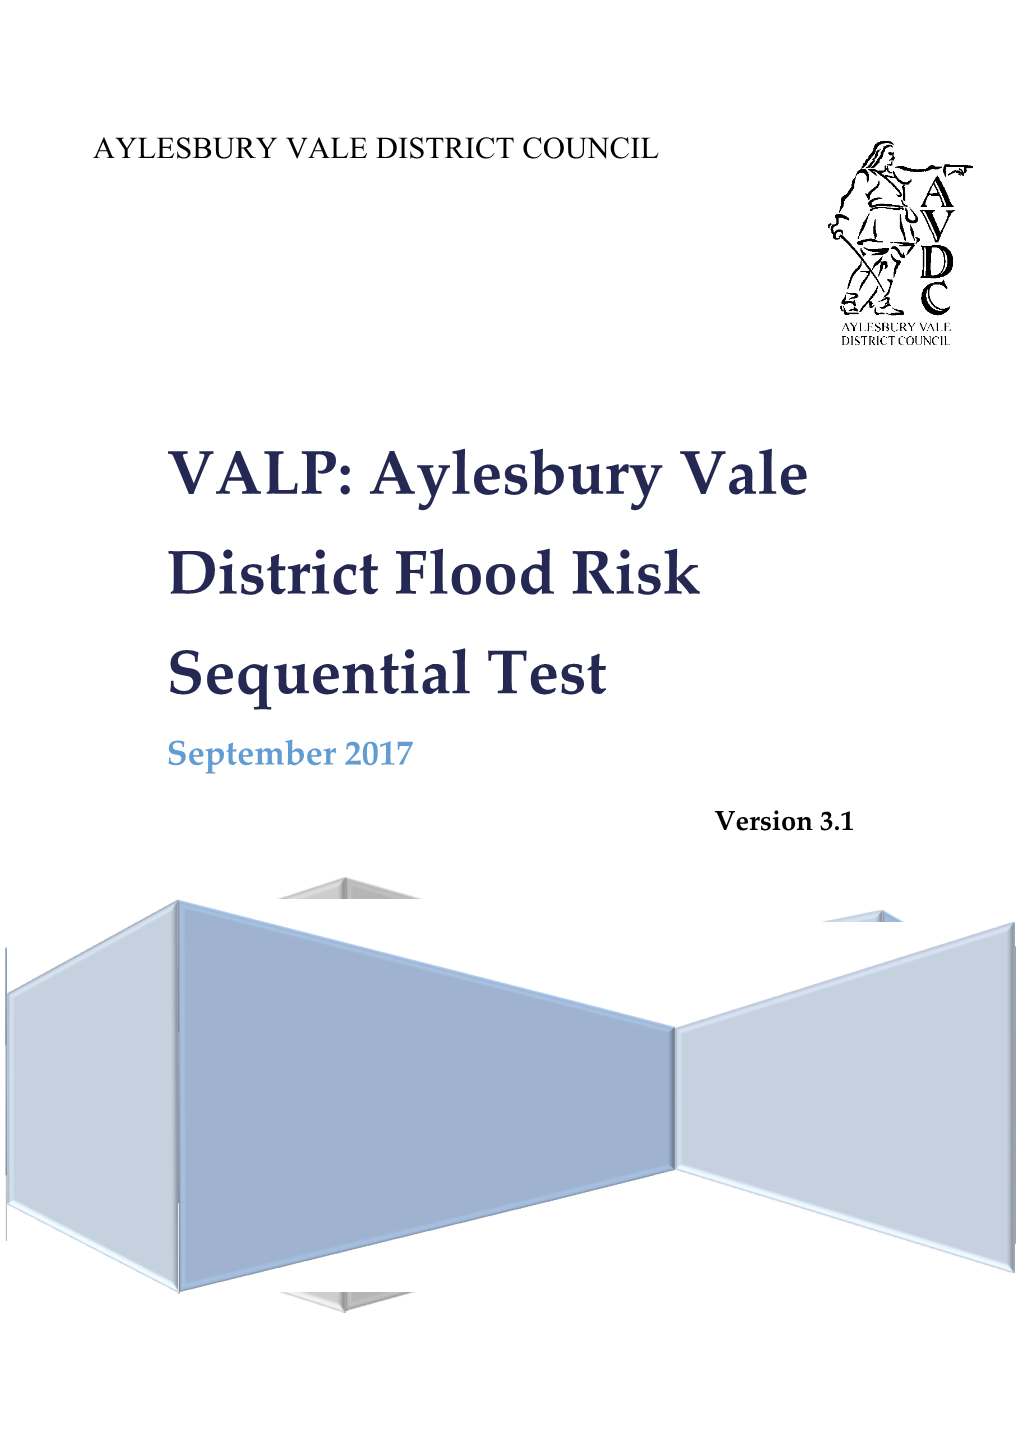 Aylesbury Vale District Flood Risk Sequential Test September 2017